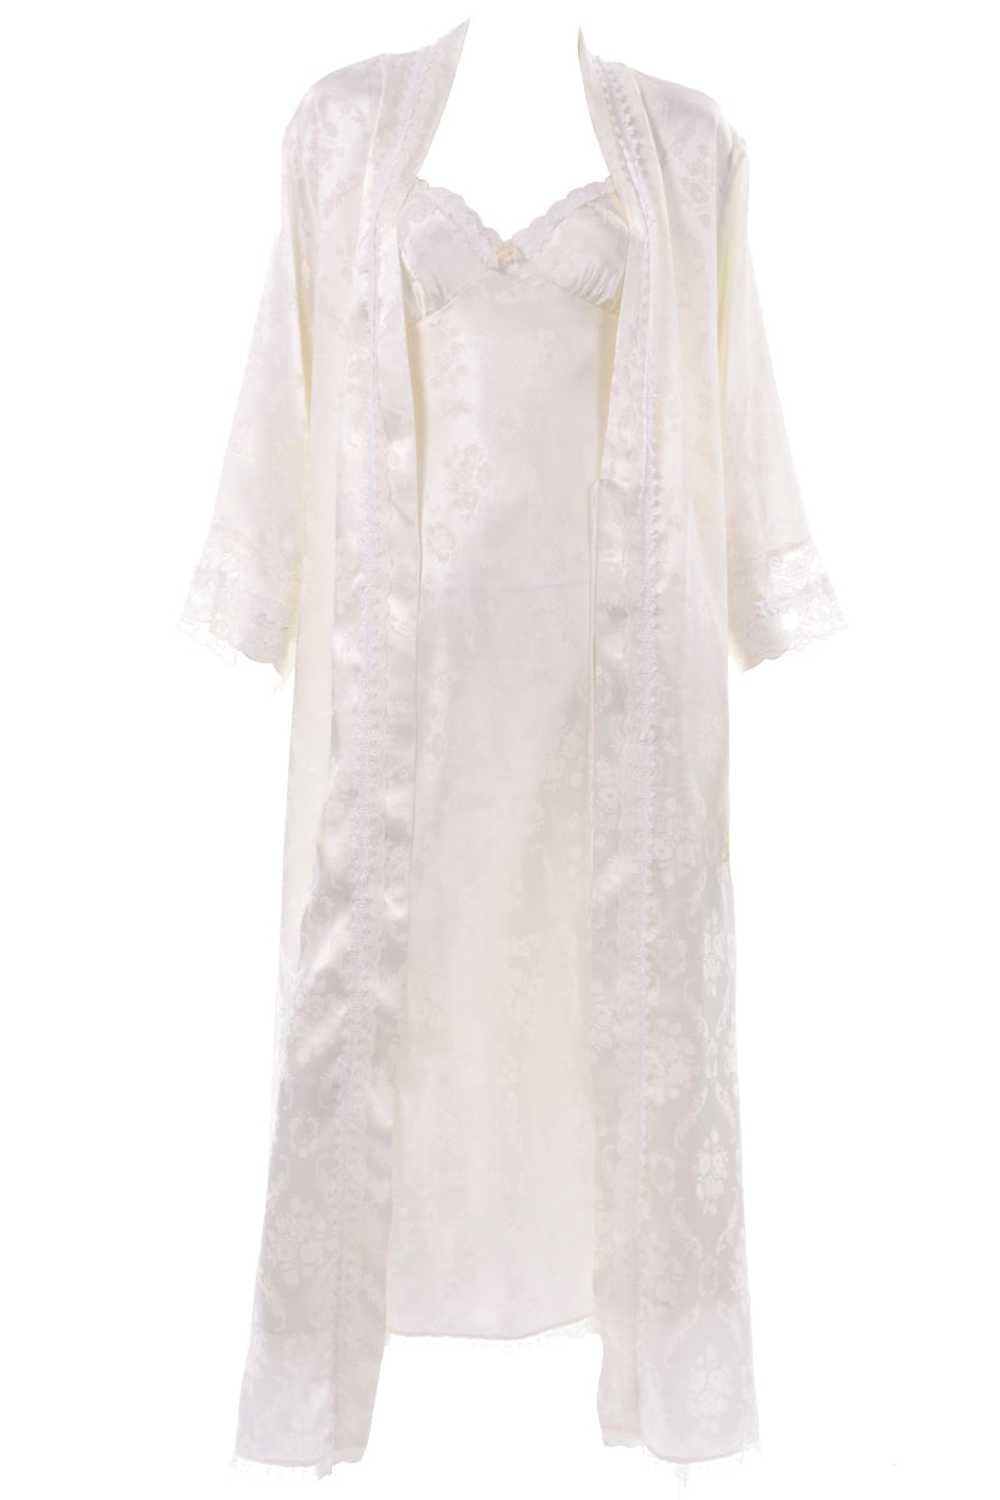 1980s Christian Dior Ivory Robe & Nightgown Set - image 1